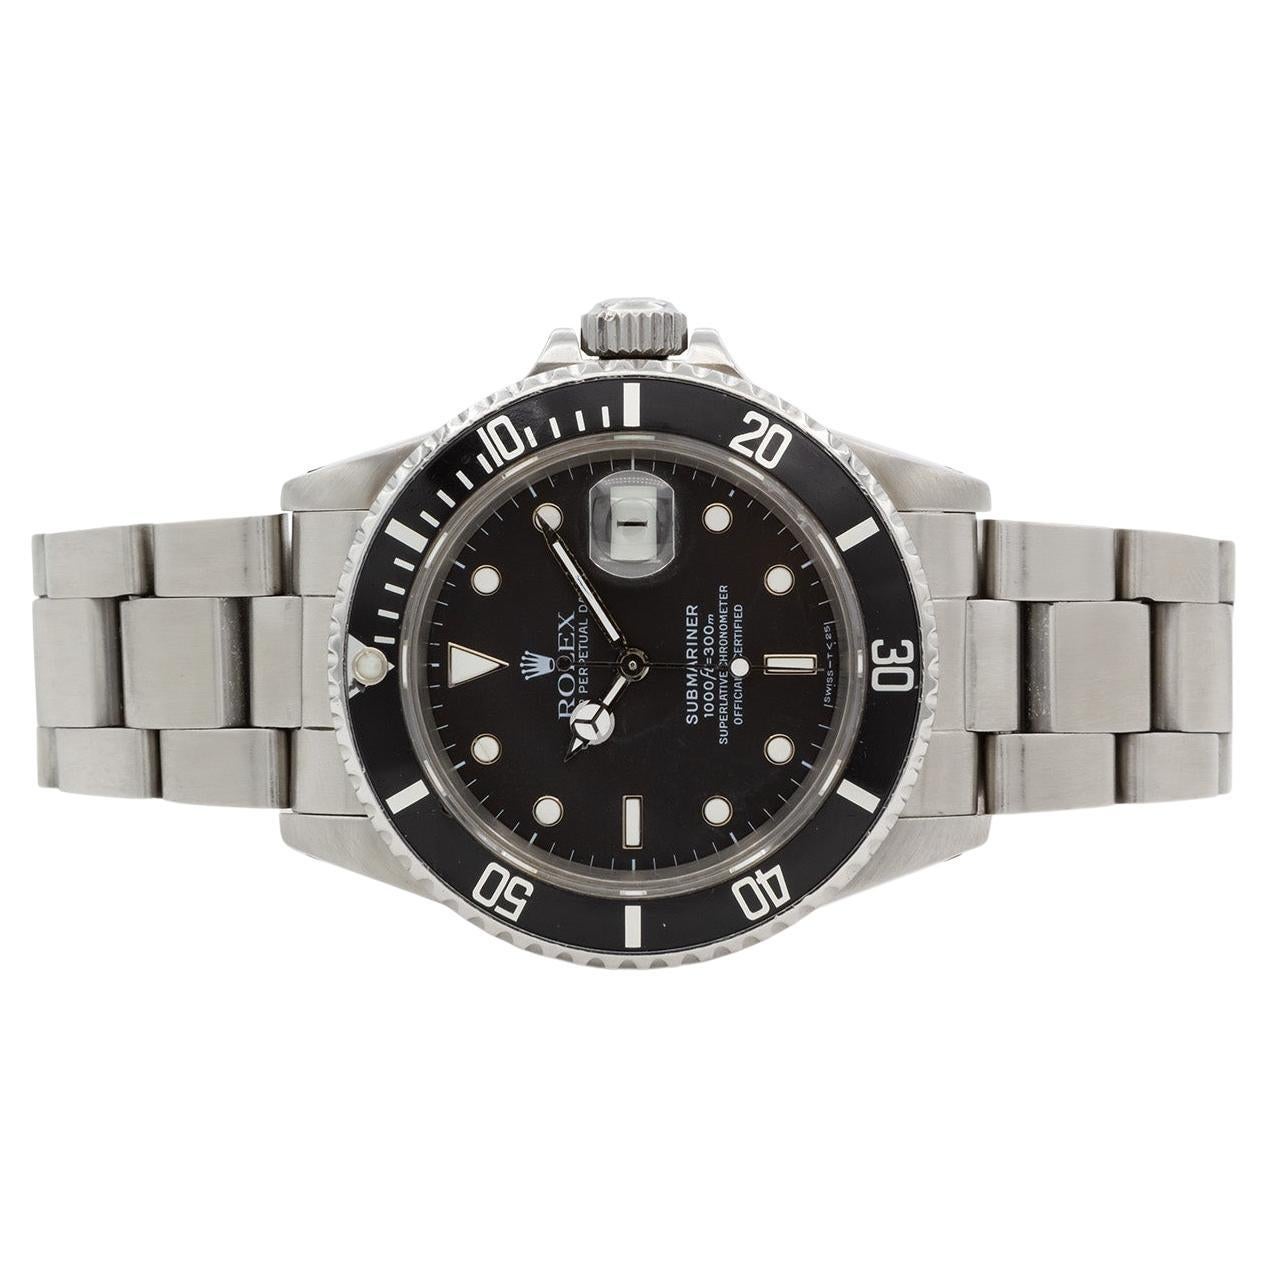 Rolex Oyster Perpetual Submariner. Model 16800. Circa 1980